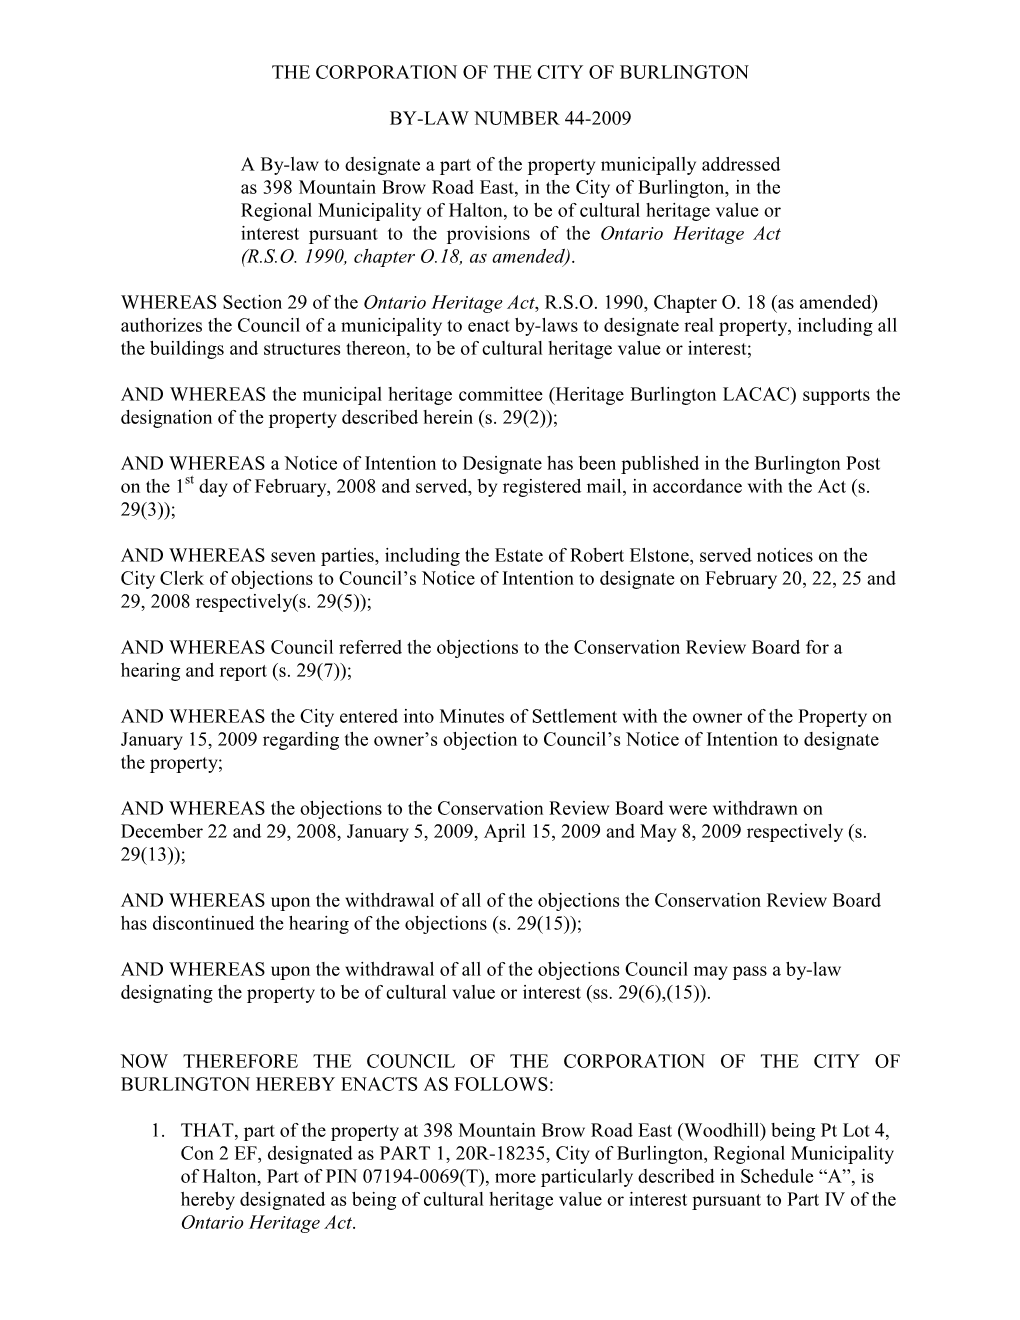 The Corporation of the City of Burlington By-Law